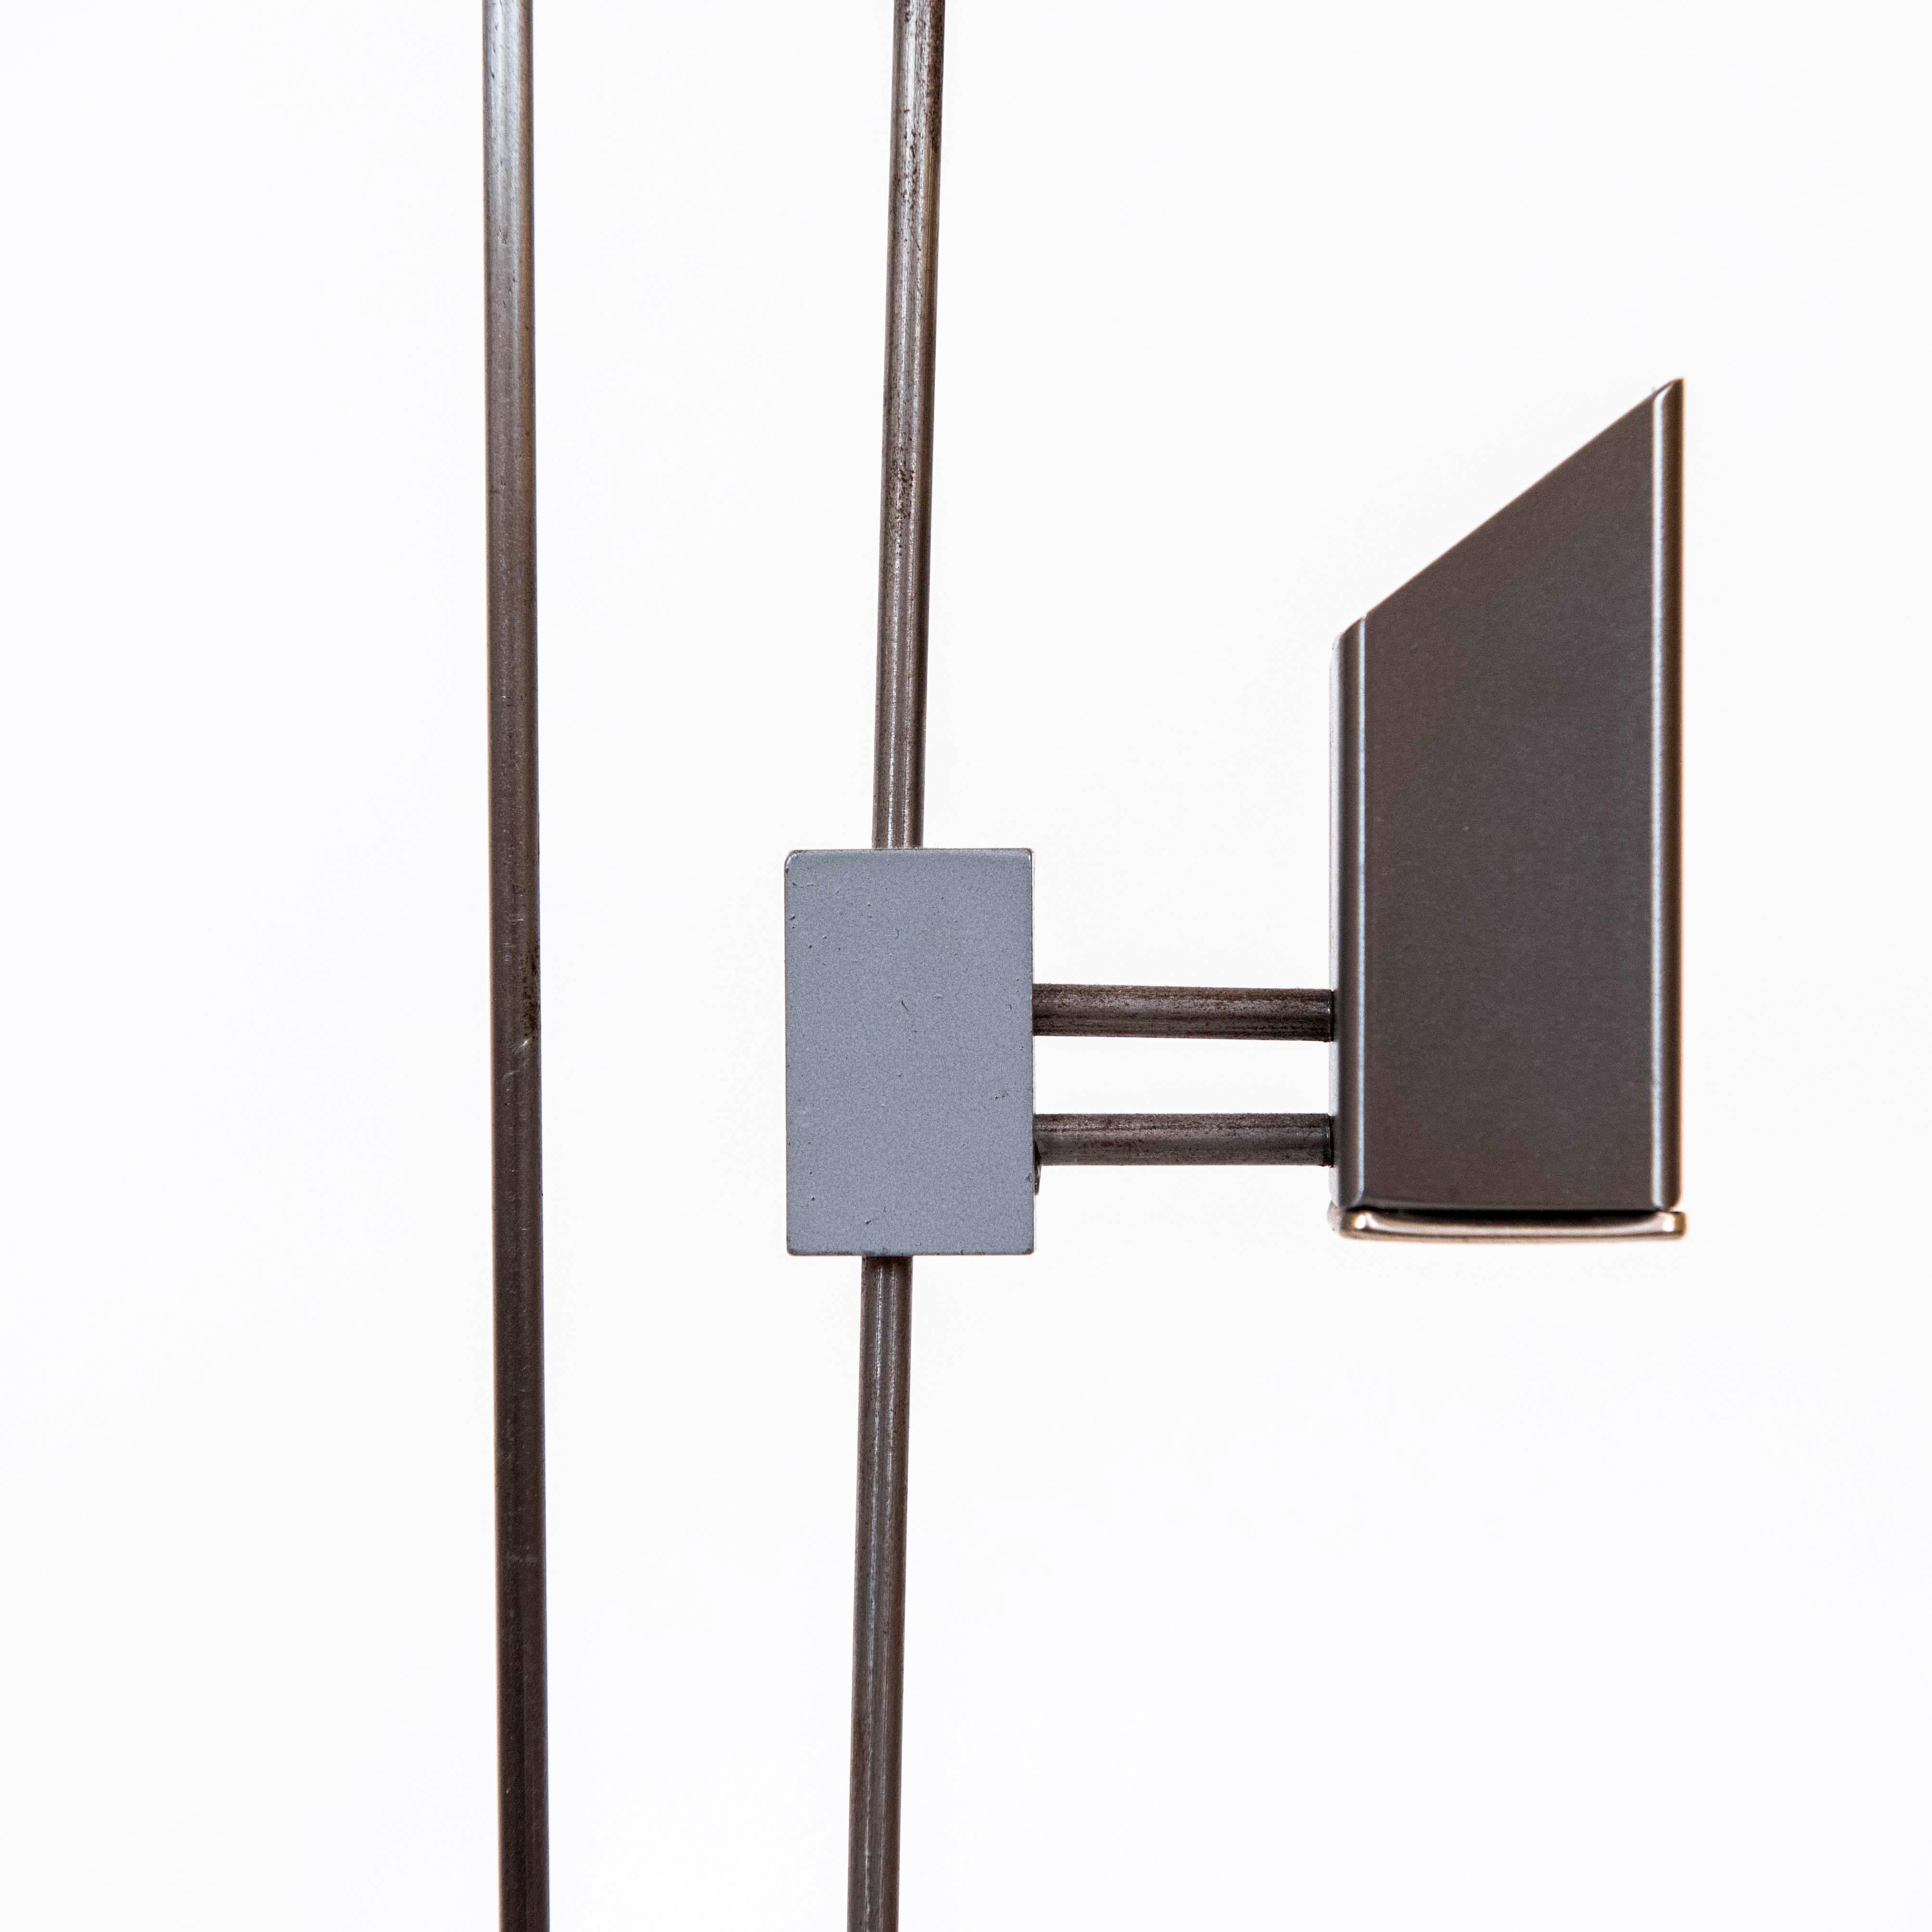 These adjustable and cool sculptural metal candle holders are by David Zelman and are signed and dated D. Zelman, Prologue, 1988. The holders are able to pivot and move up and down the rod. Great form!

  